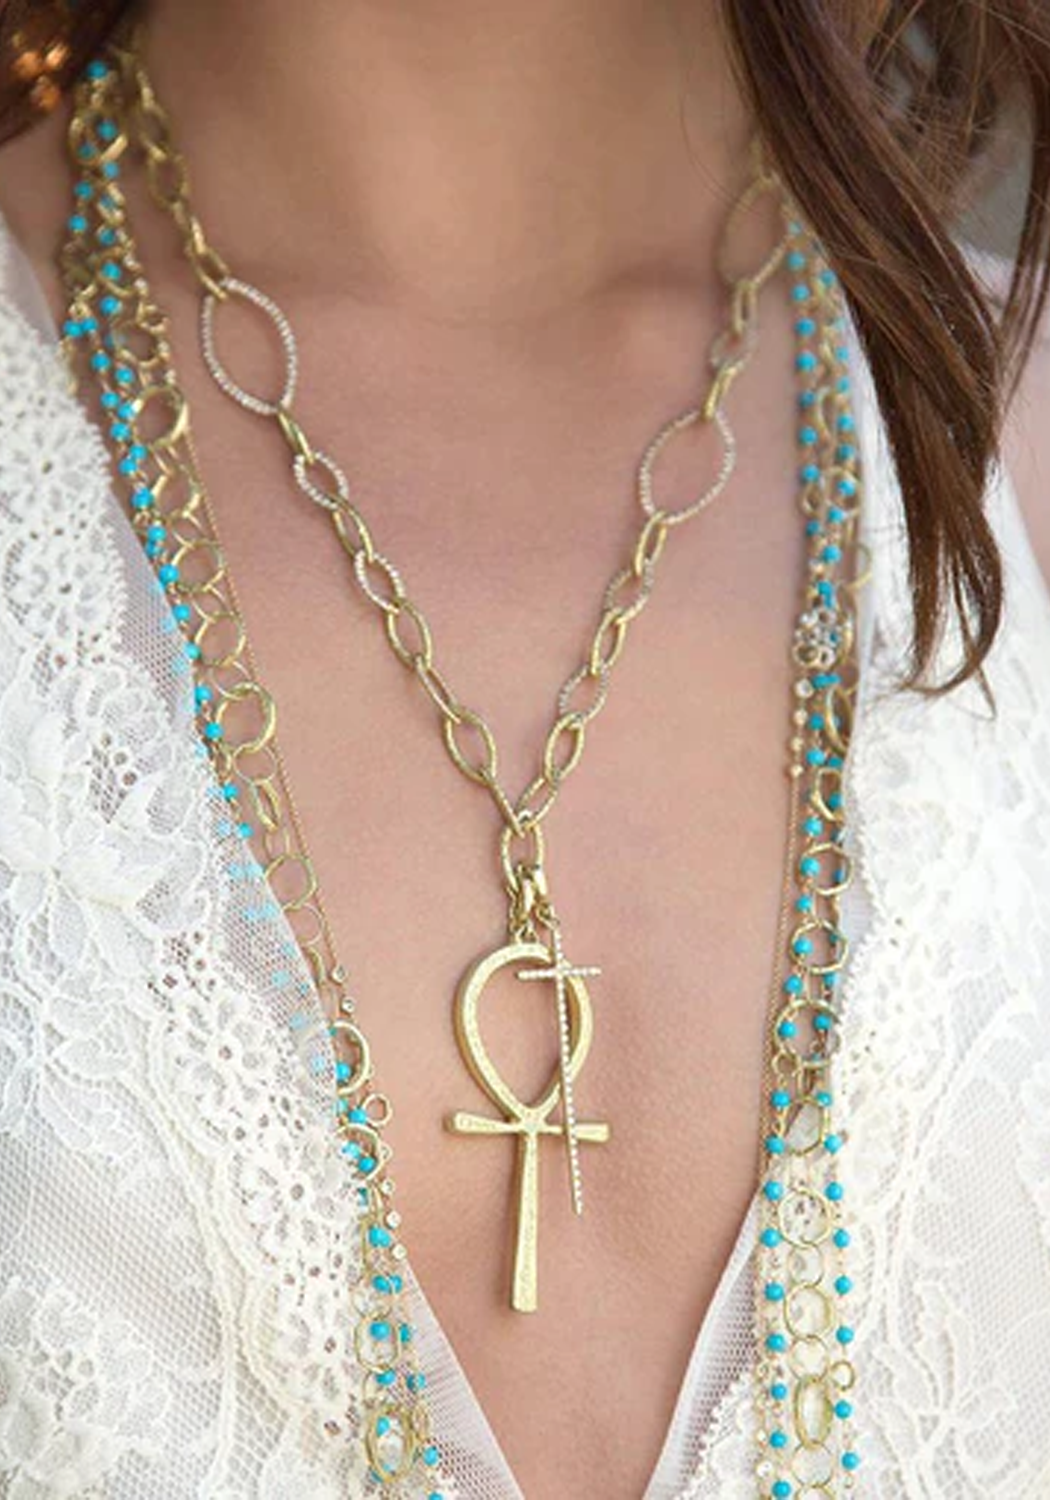 Dominique Cohen 18KYG Classic Opera Chain Necklace Style Idea (Sold Separately) | OsterJewelers.com